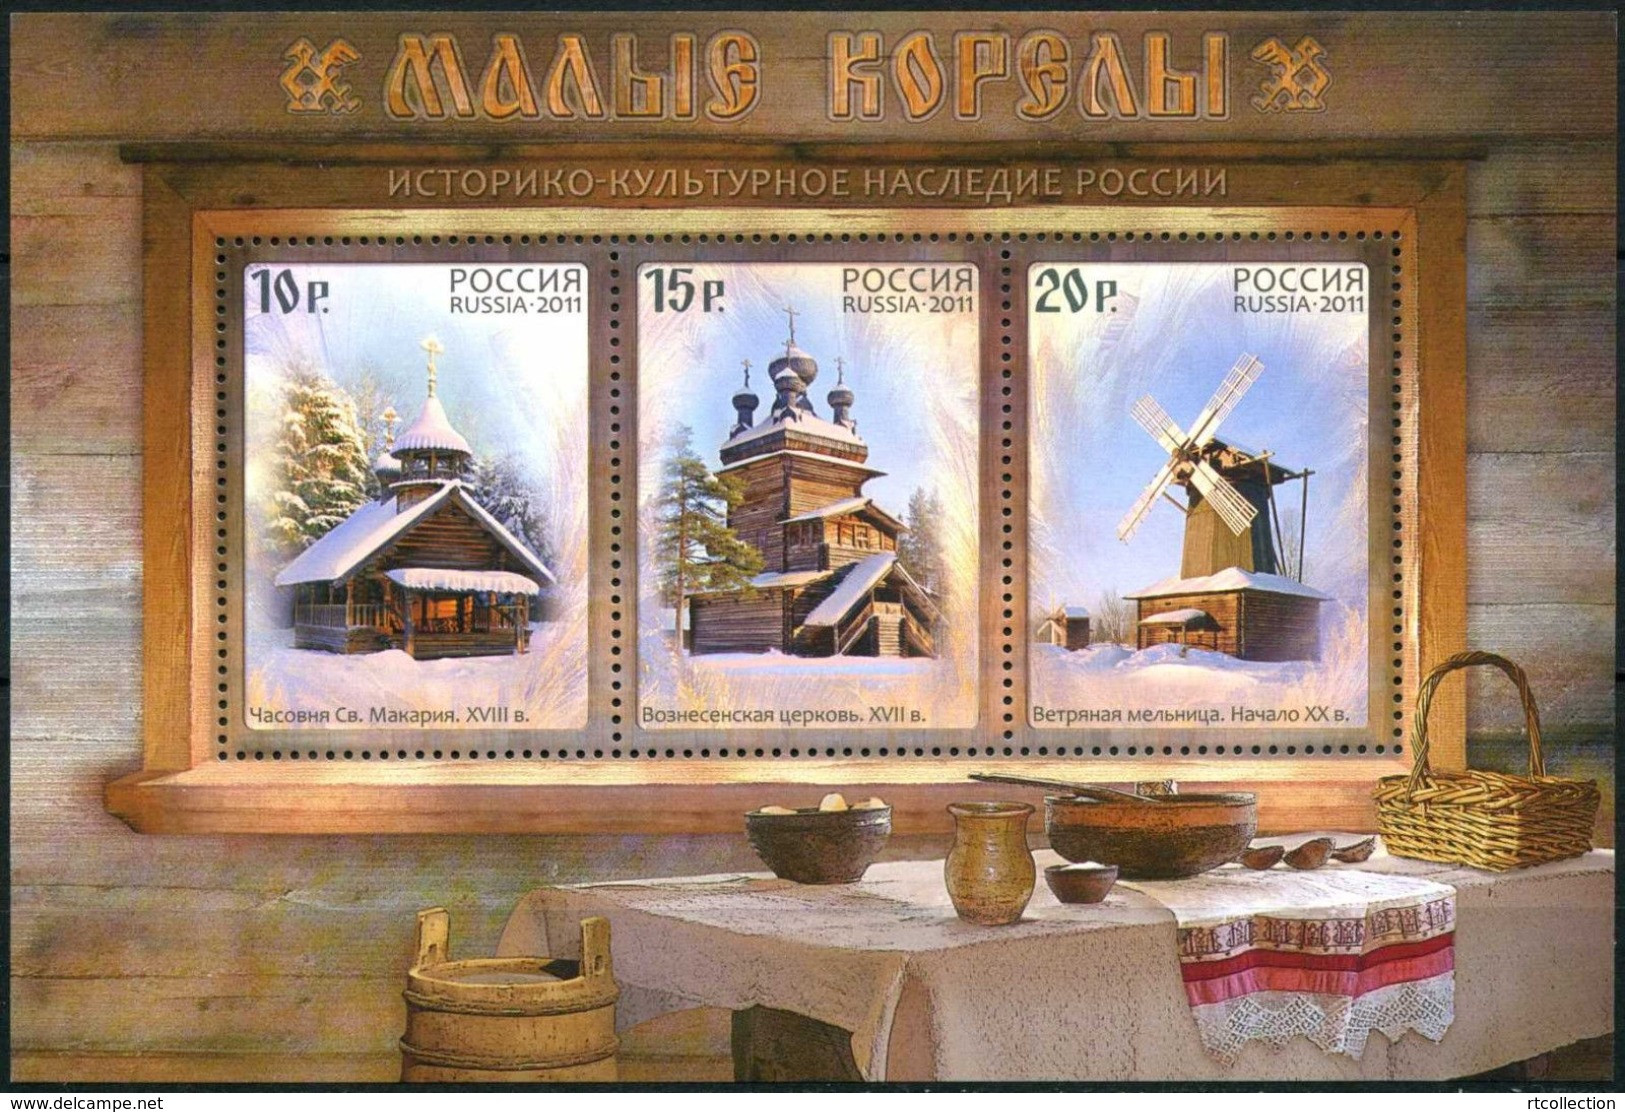 Russia 2011 Souvenir Pack Booklet FDC Museum Wooden Architecture Folk Art Malye Korely Historical Culture Heritage Stamp - Colecciones